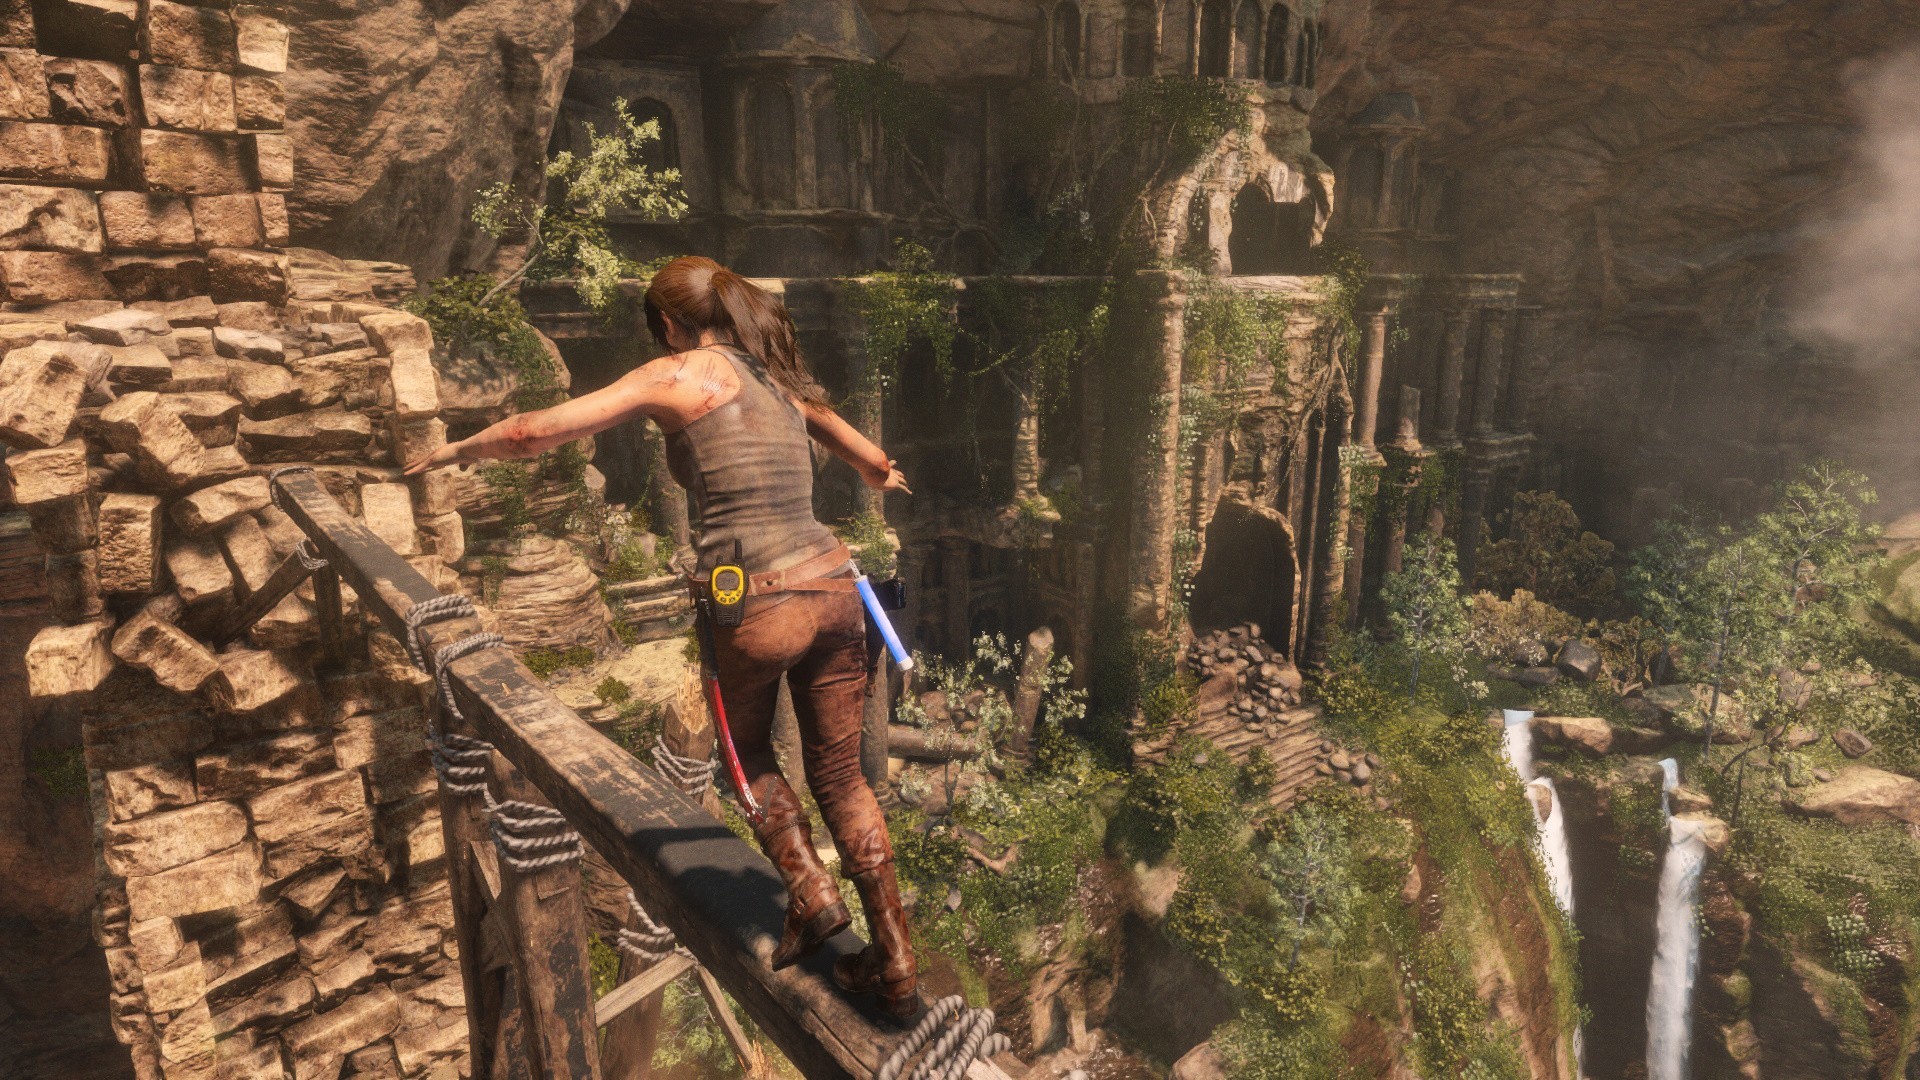 tomb raider rise of the tomb raider pc release date